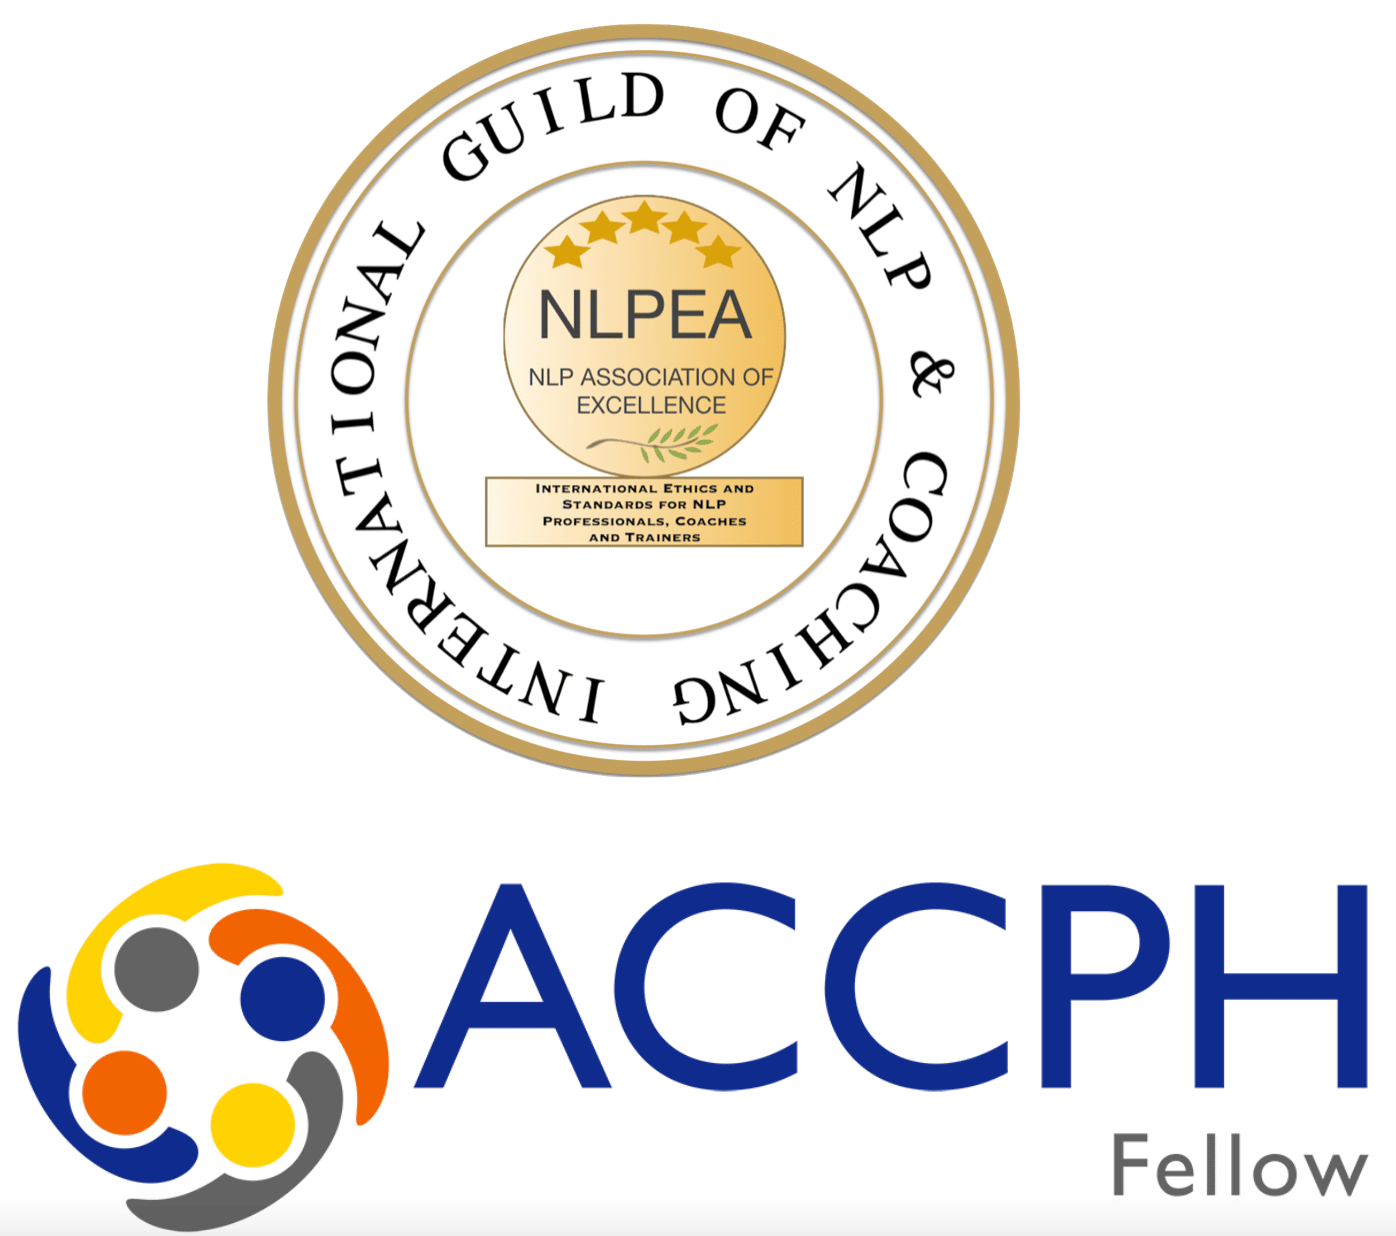 ACCPH and NLPEA accreditation